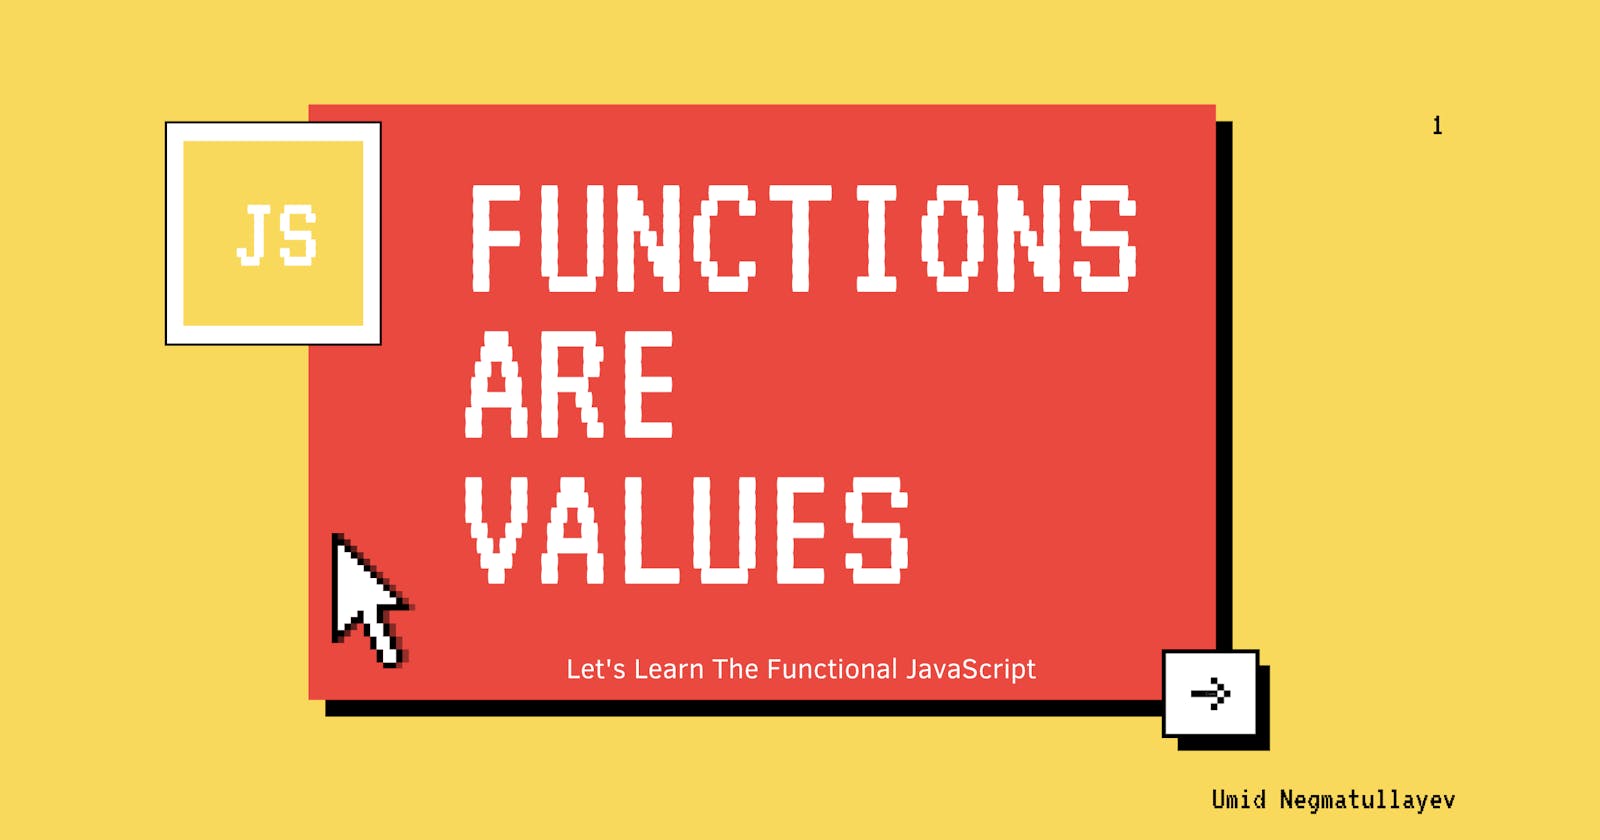 Functions are first-class objects.